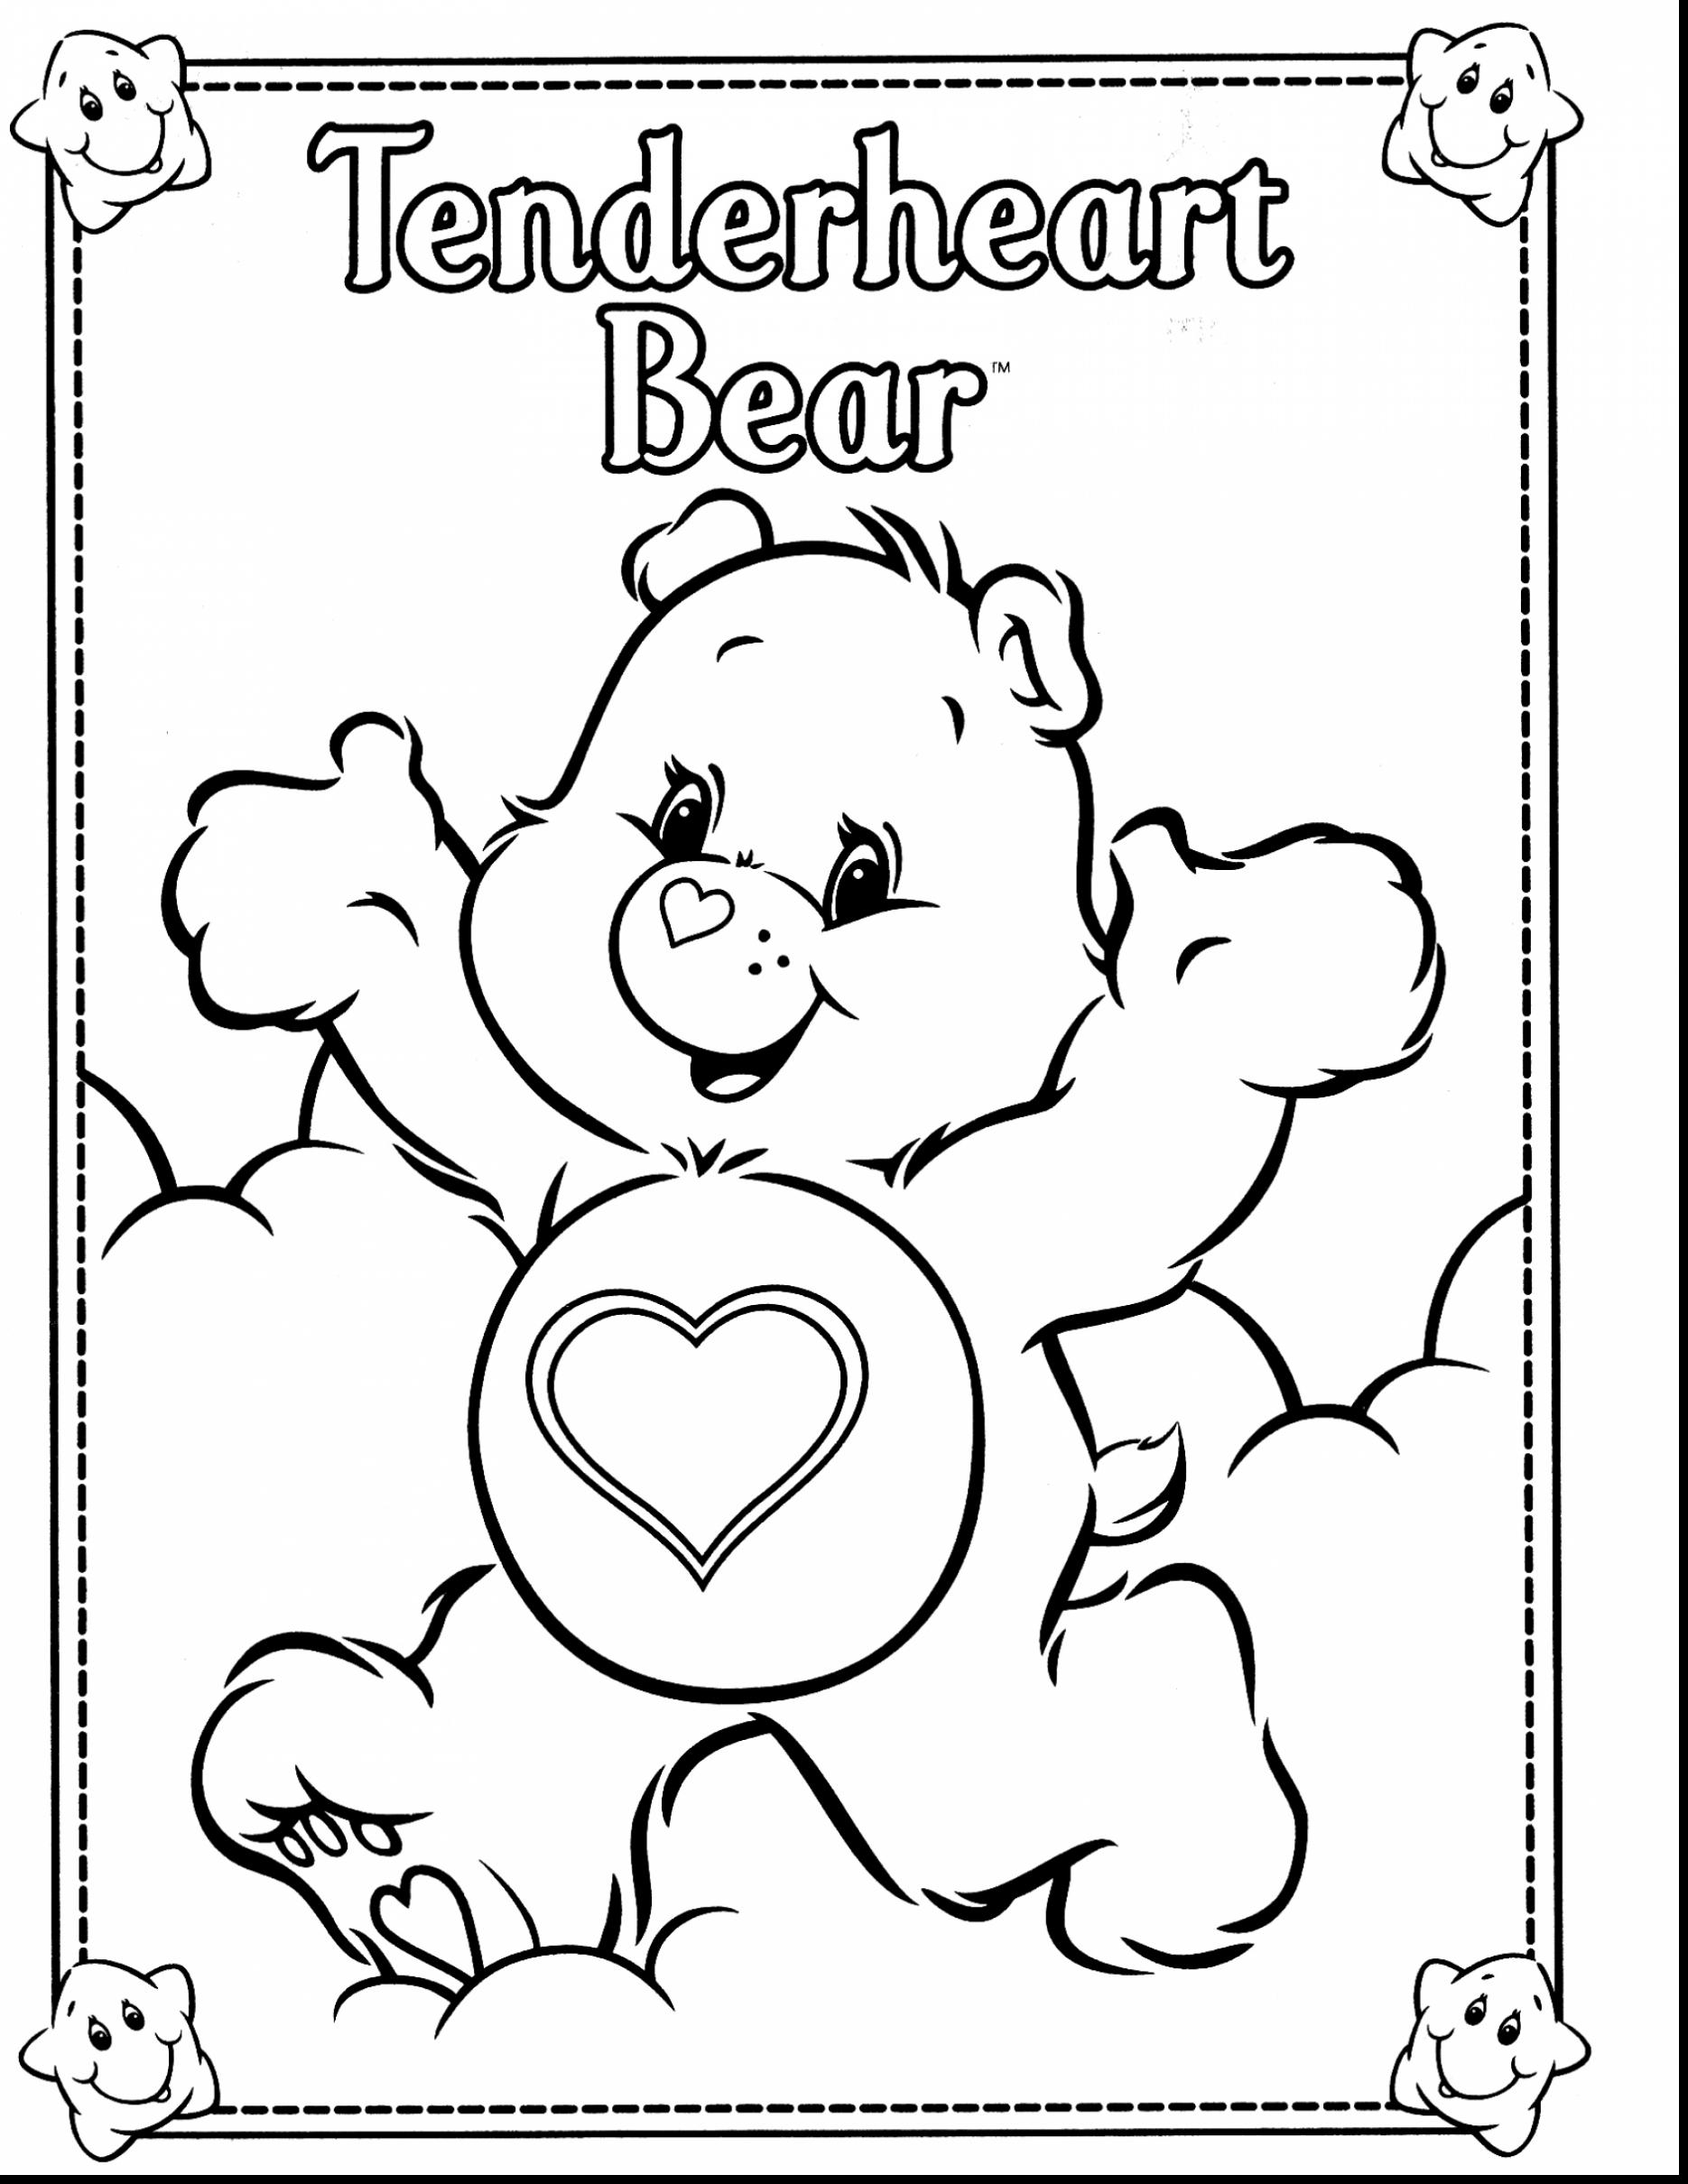 Free Care Bear Coloring Pages Printable Care Bears Coloring Pages That Are Colored Strawberry